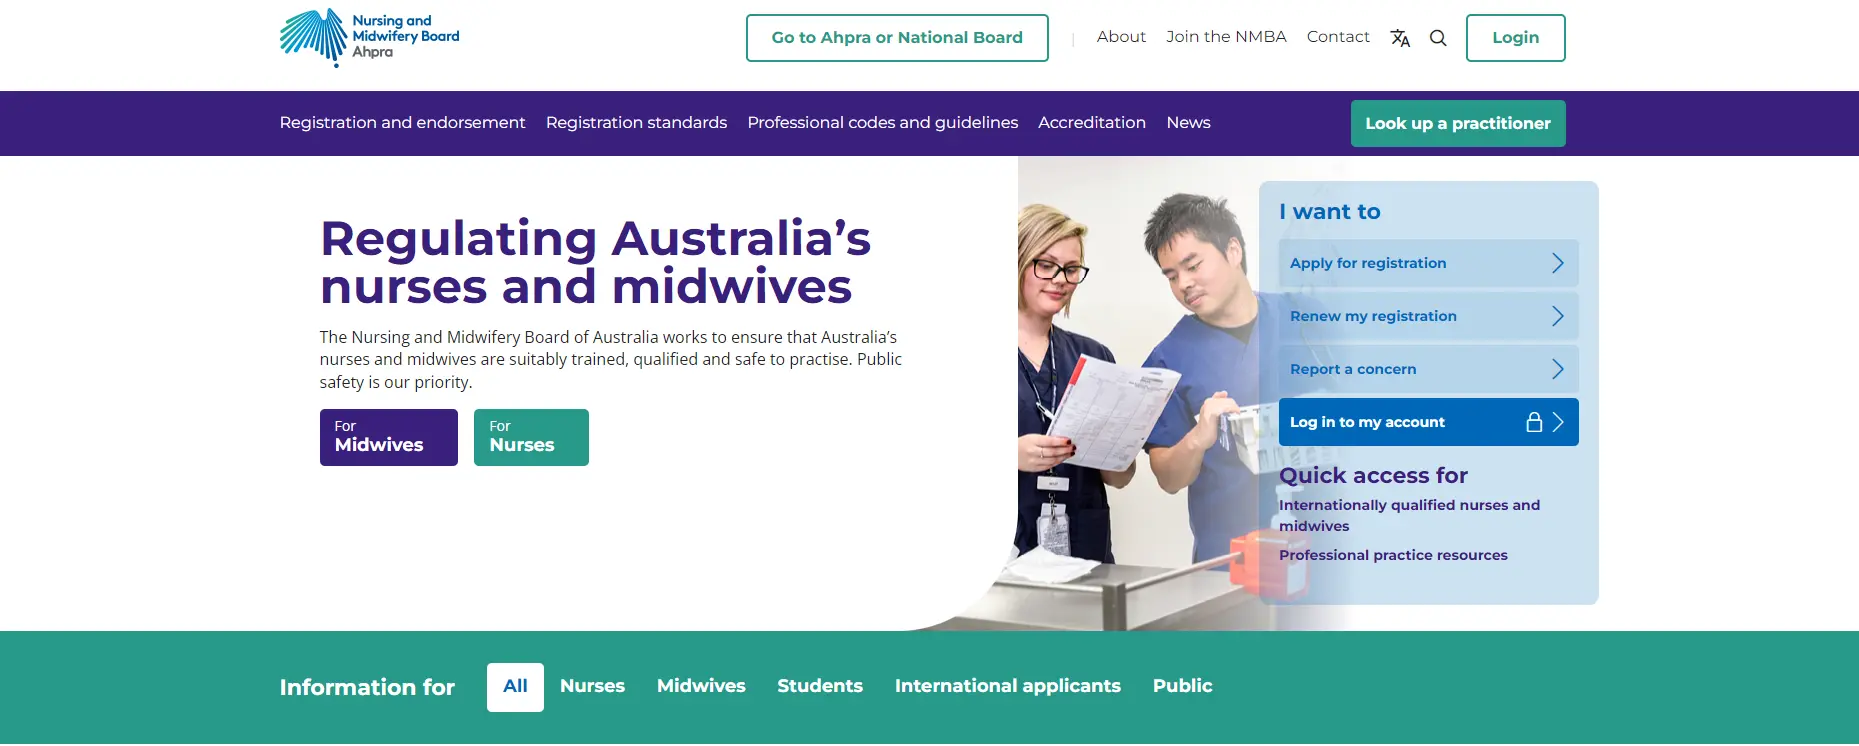 OET Requirements for Australian Nursing and Midwifery Registration: A Comprehensive Guide